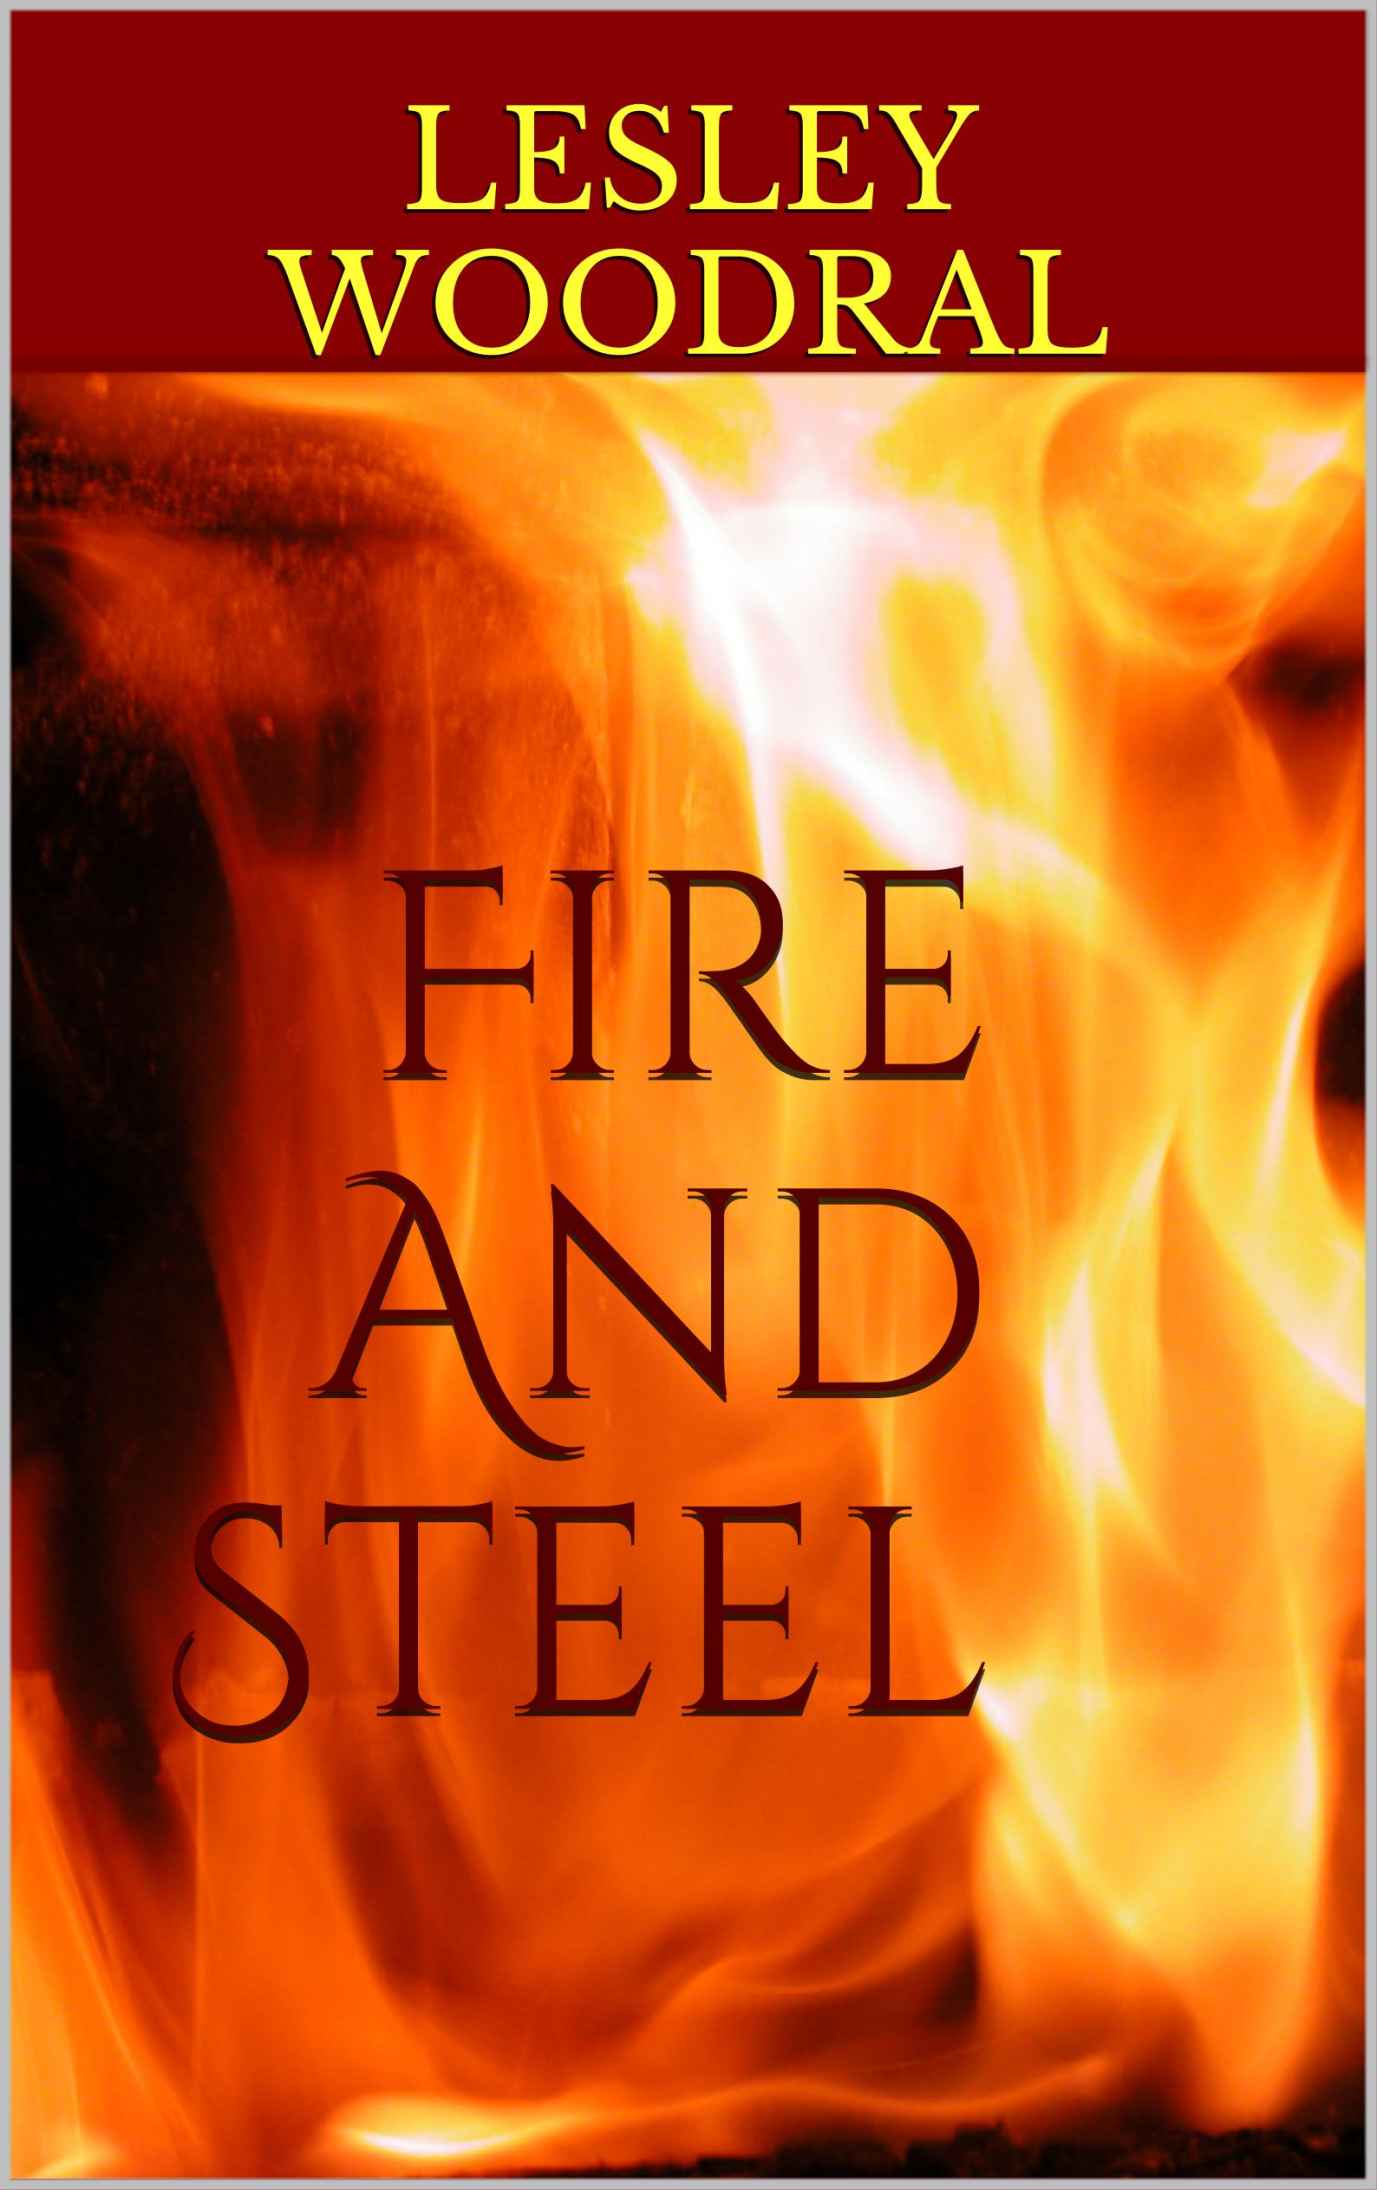 Fire And Steel (The Merryweather Chronicles Book 2) by Lesley Woodral